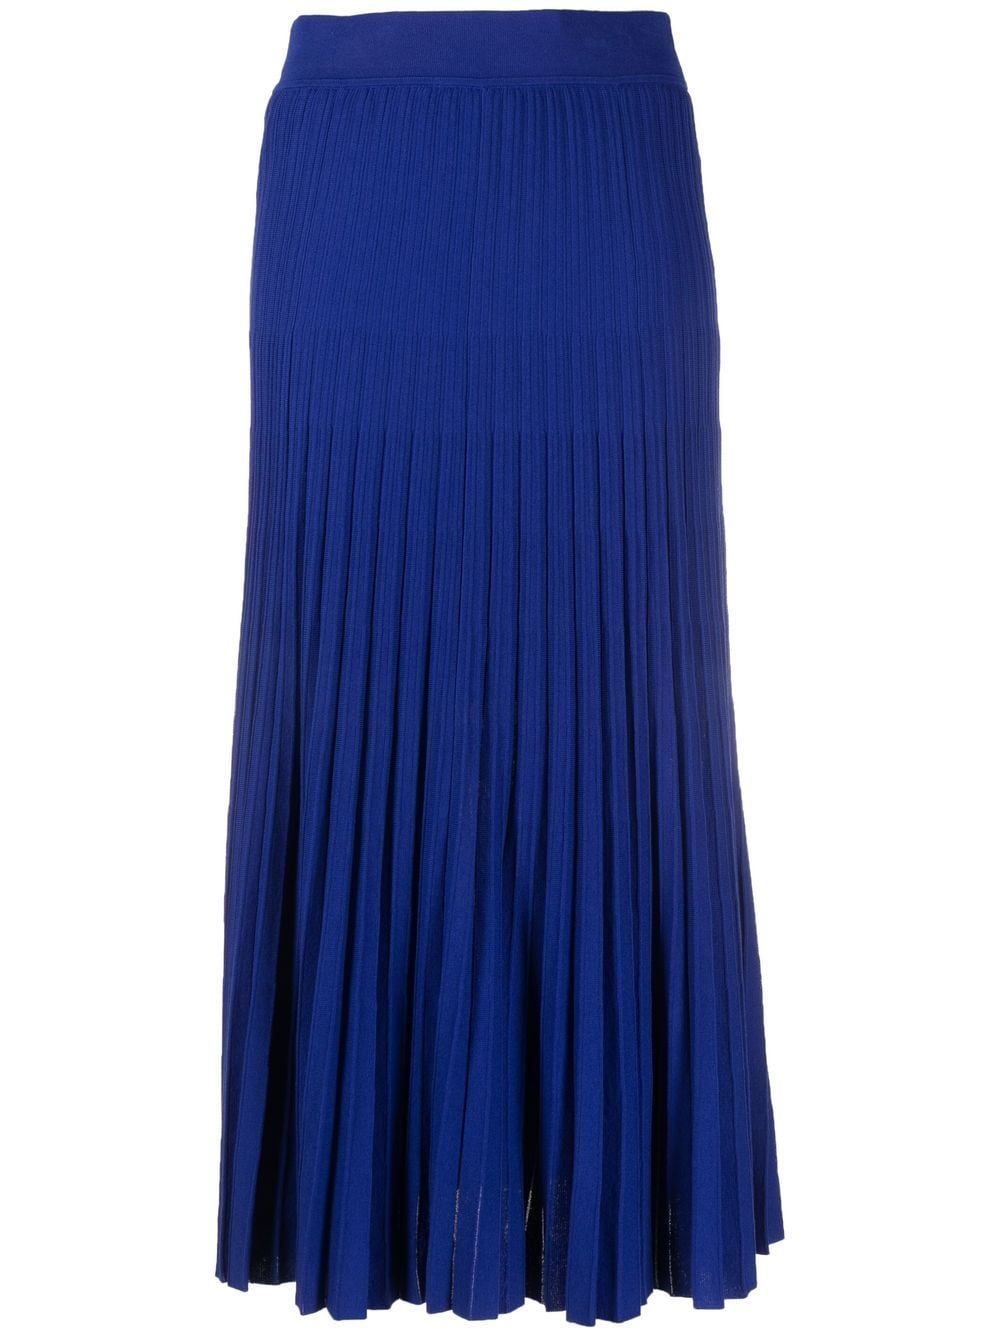 Image 1 of P.A.R.O.S.H. pleated midi skirt